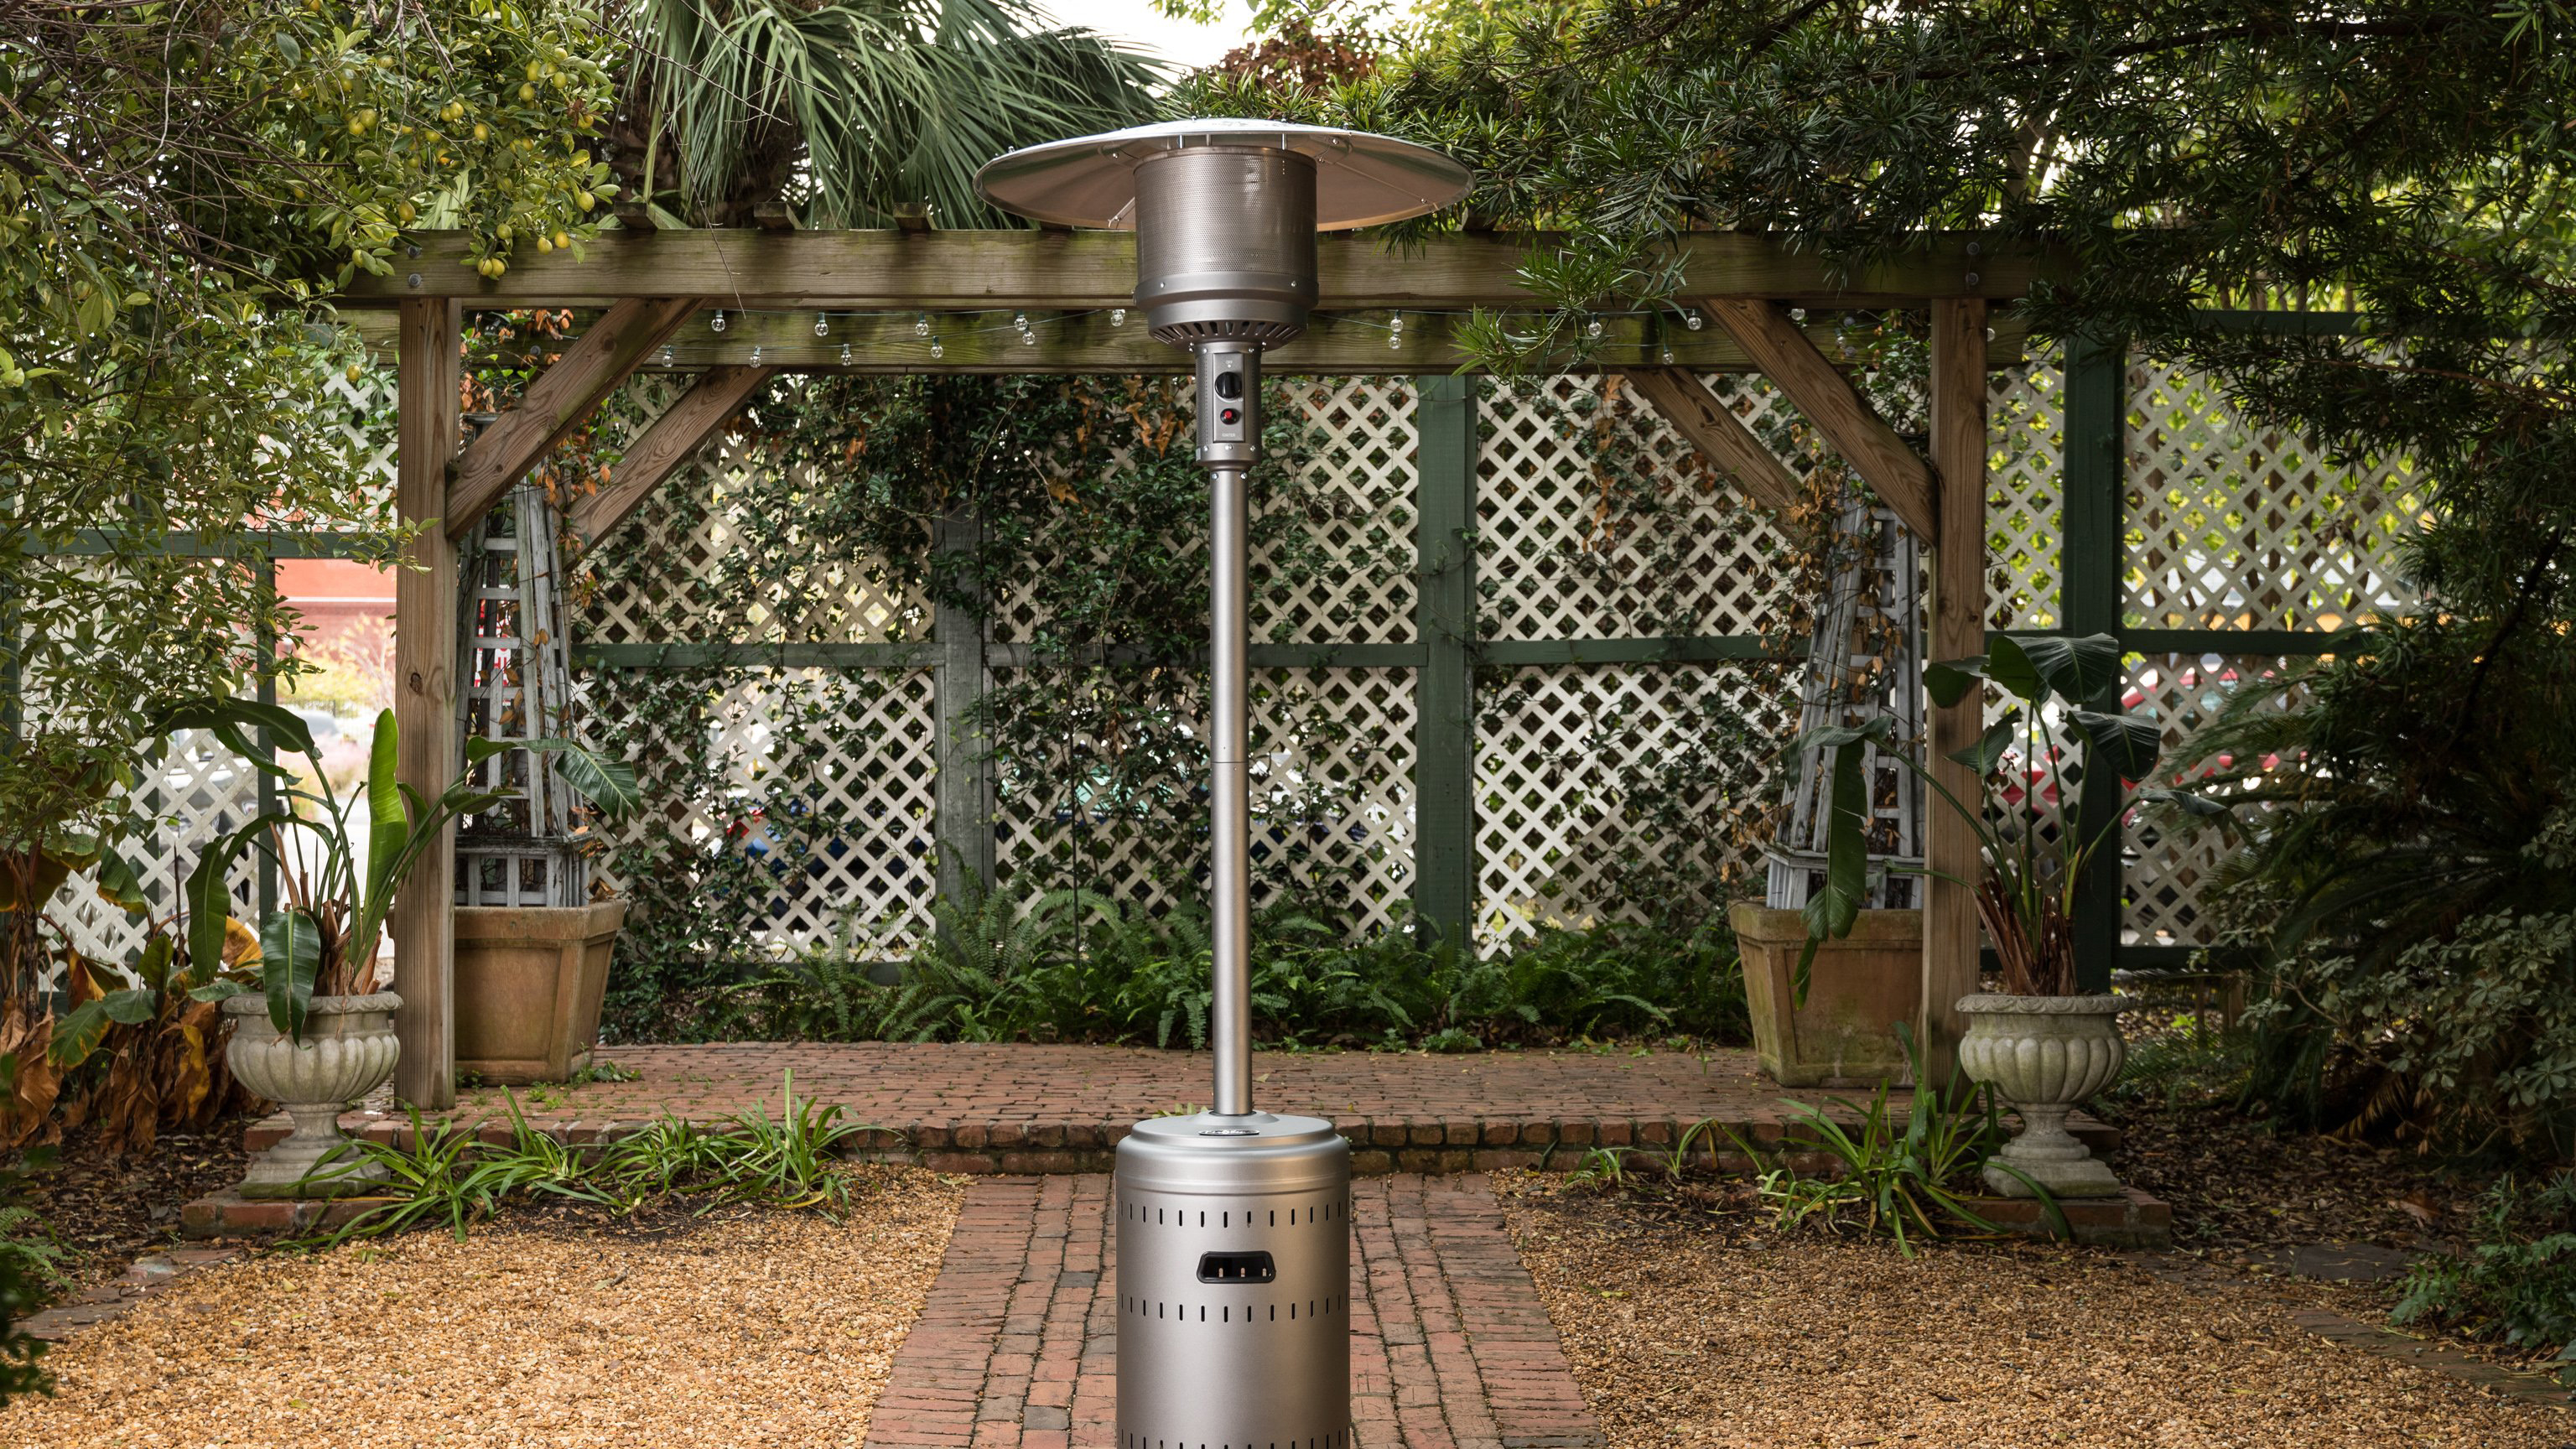 Best Patio Heaters 2019 Gas Electric And Propane Patio intended for proportions 3072 X 1728